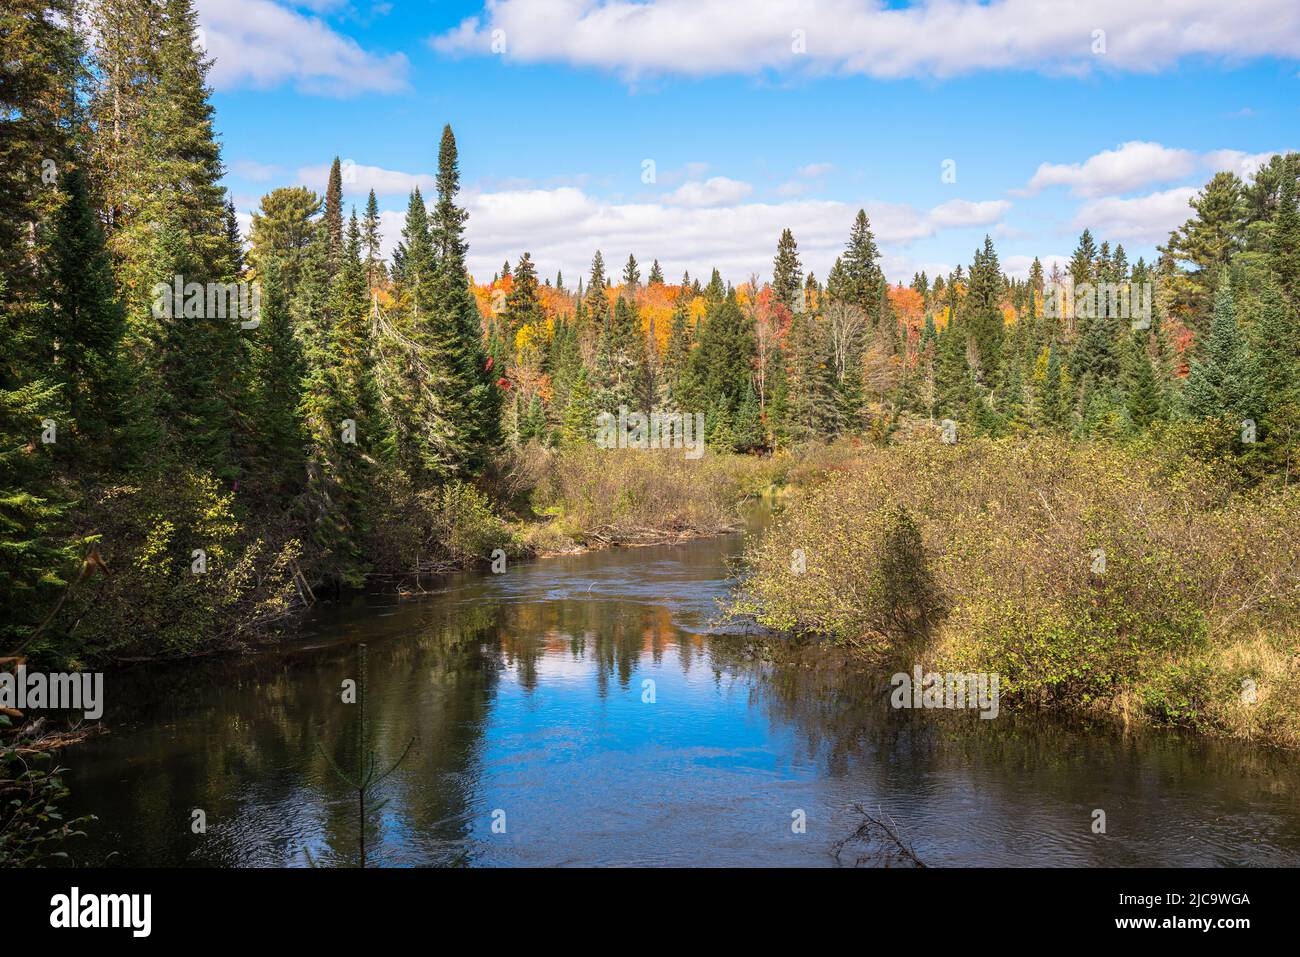 Stream running through a forest at the peak of fall foliage on a sunny day. Blue sky reflecting in water. Stock Photo